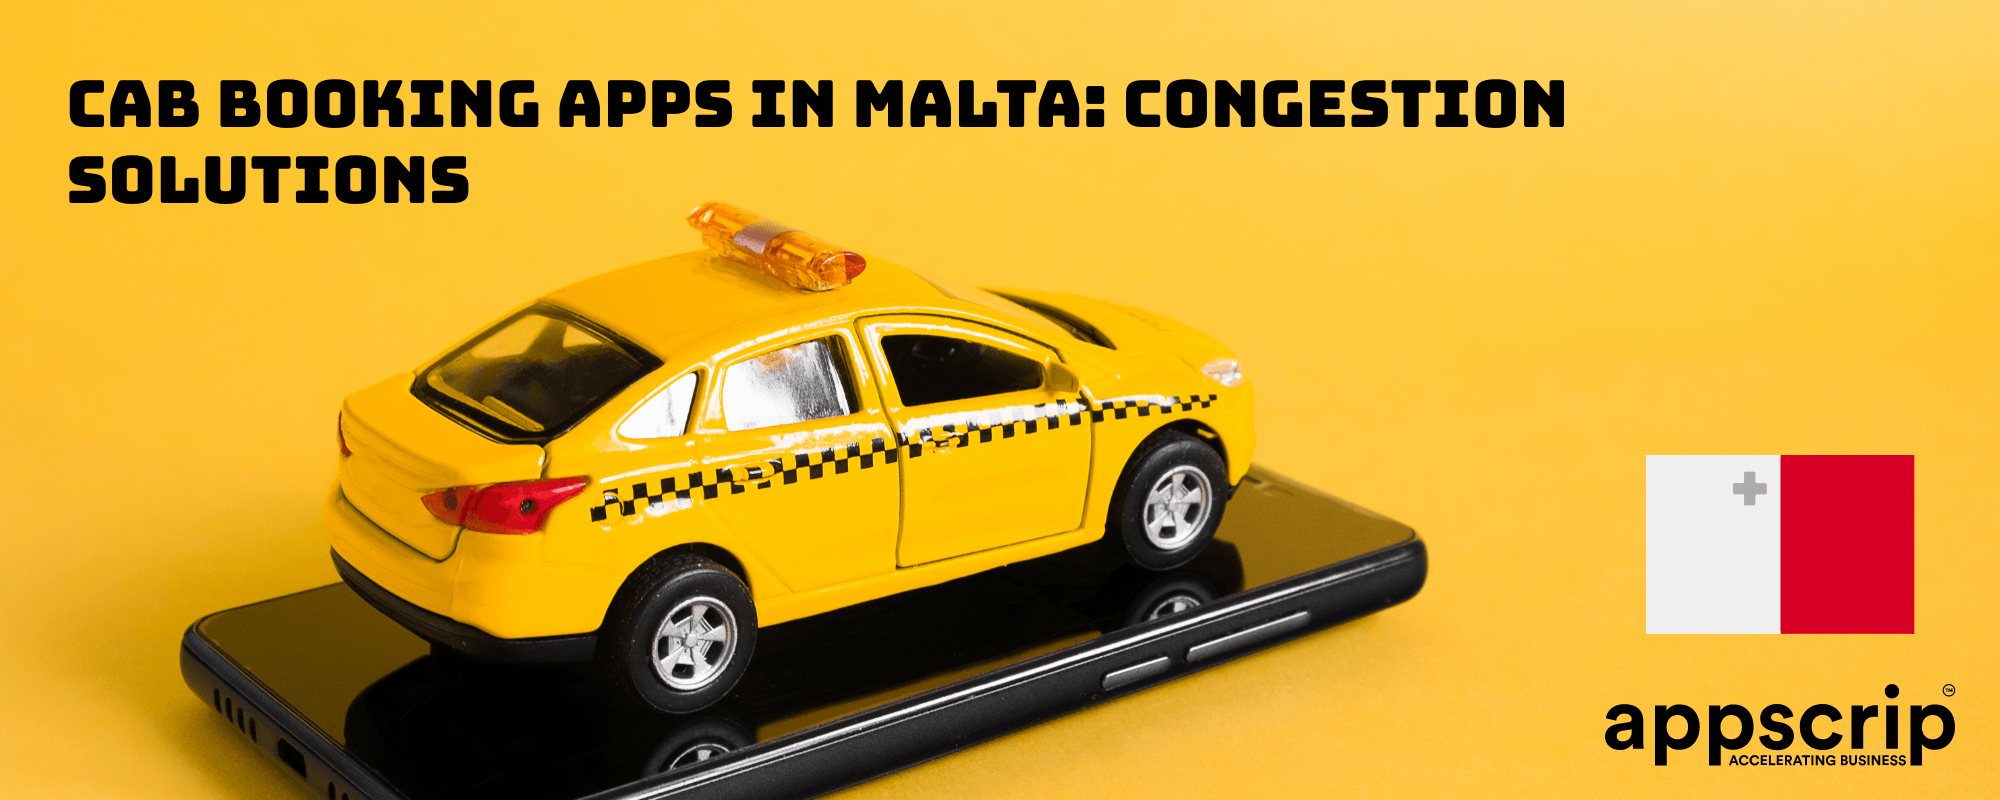 Cab Booking Apps In Malta